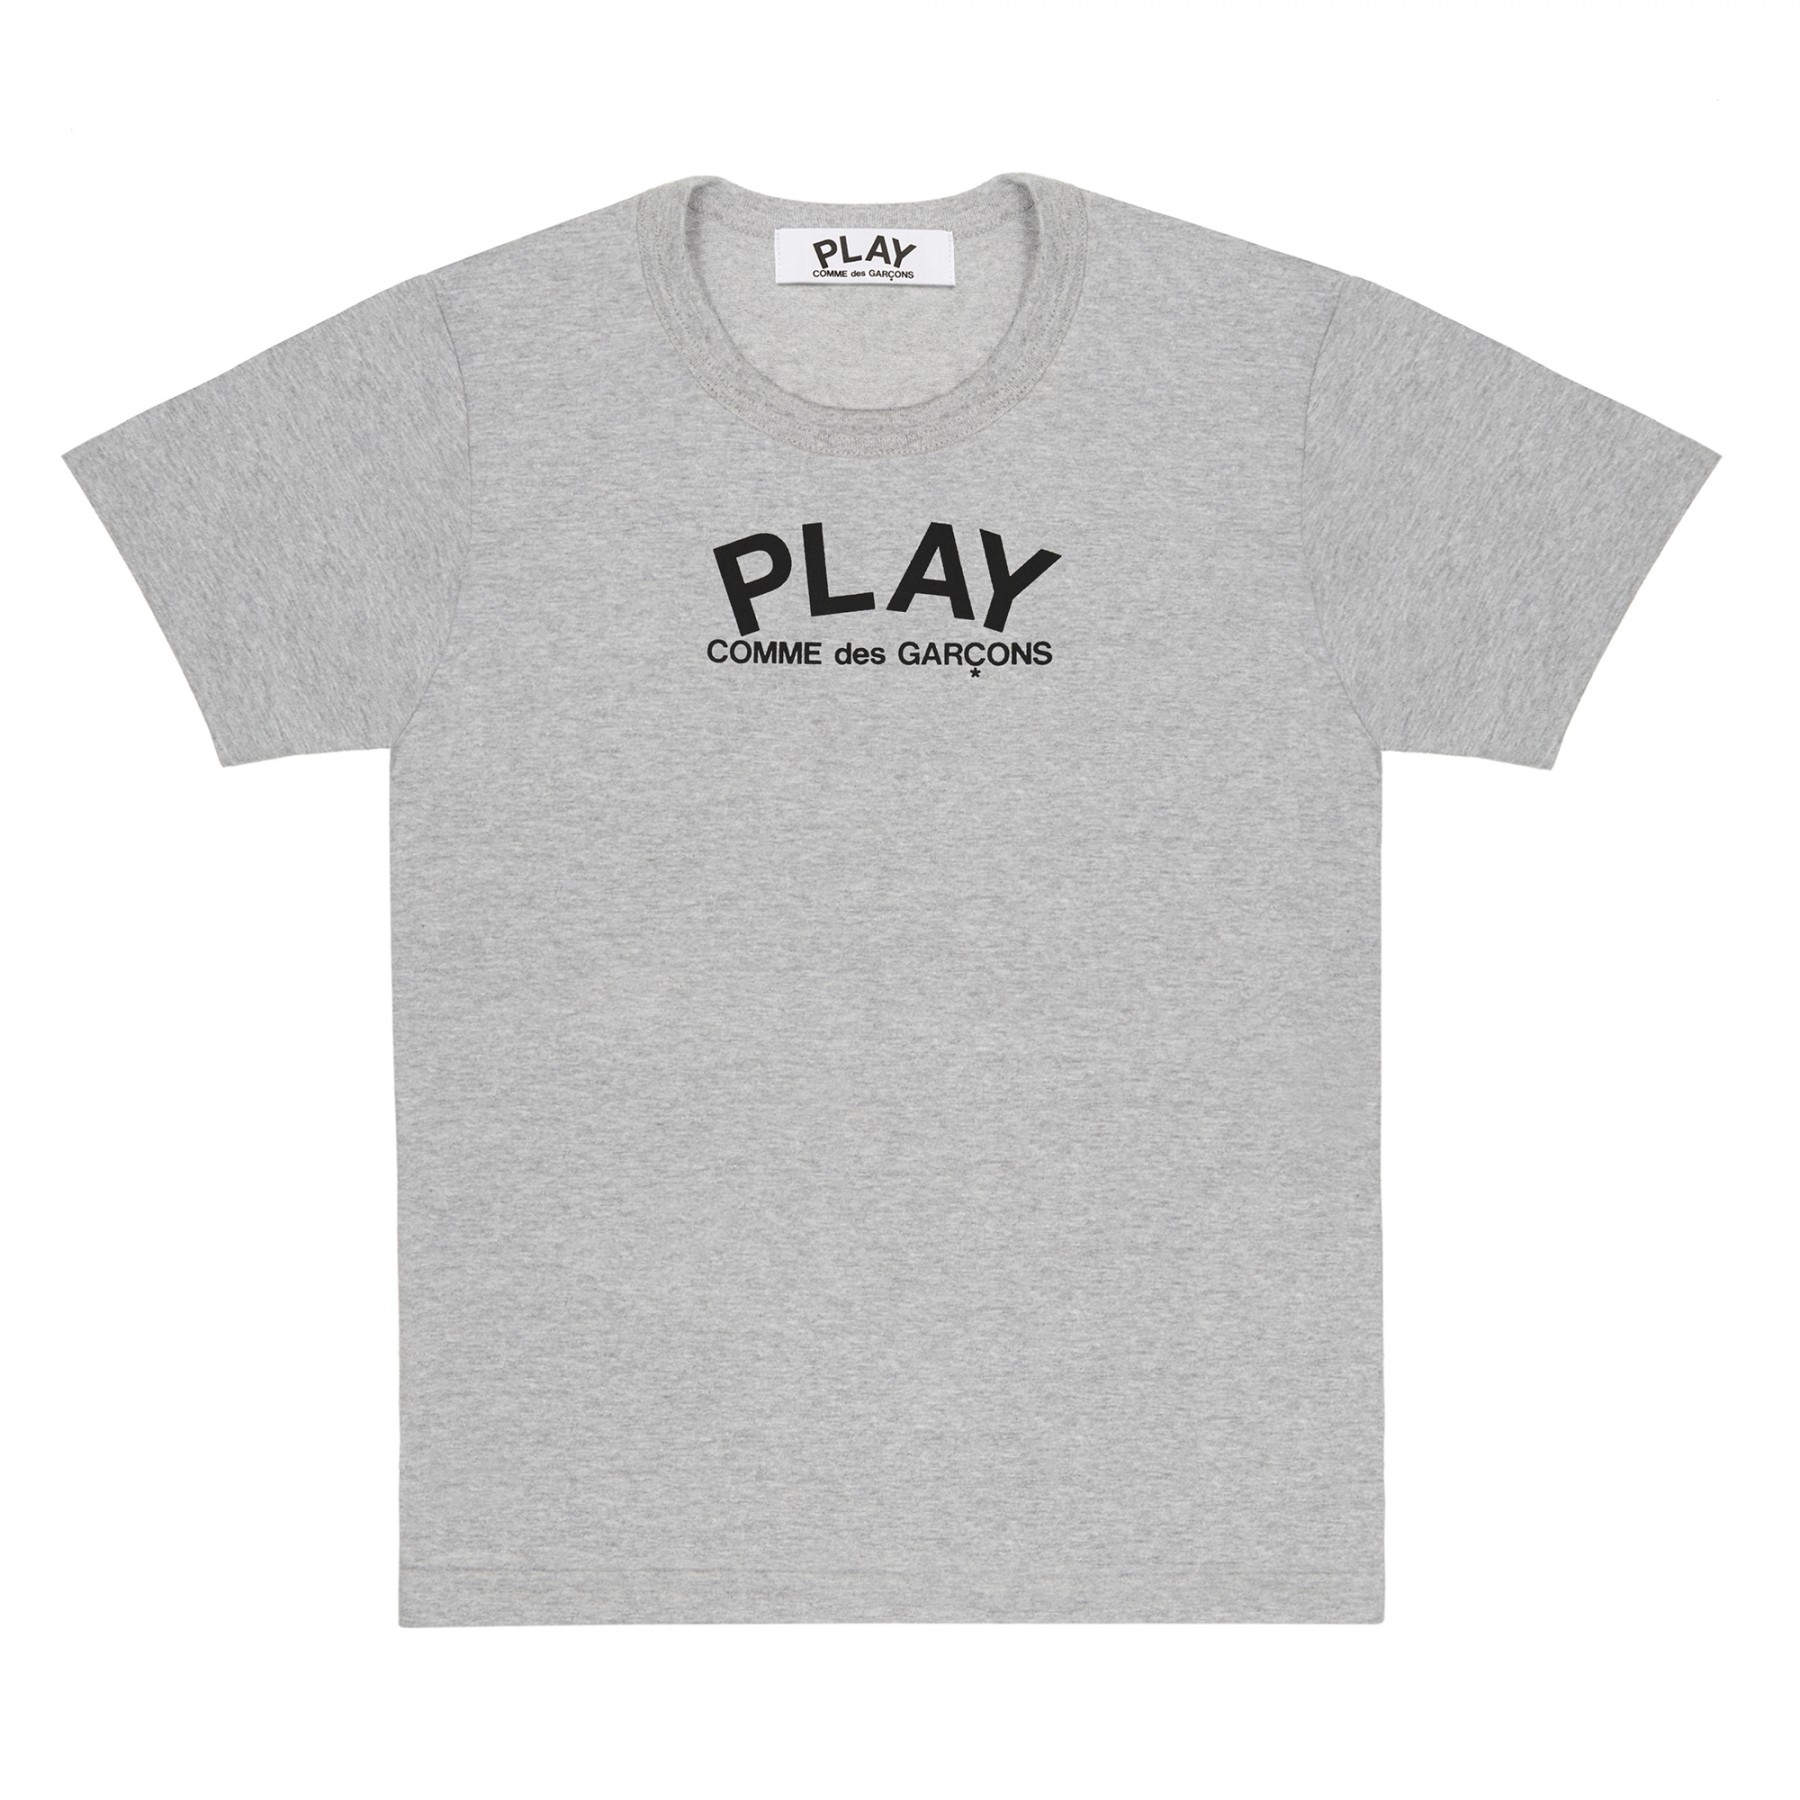 Comme Des Garcons Play Grey Play T-Shirt P1T072 